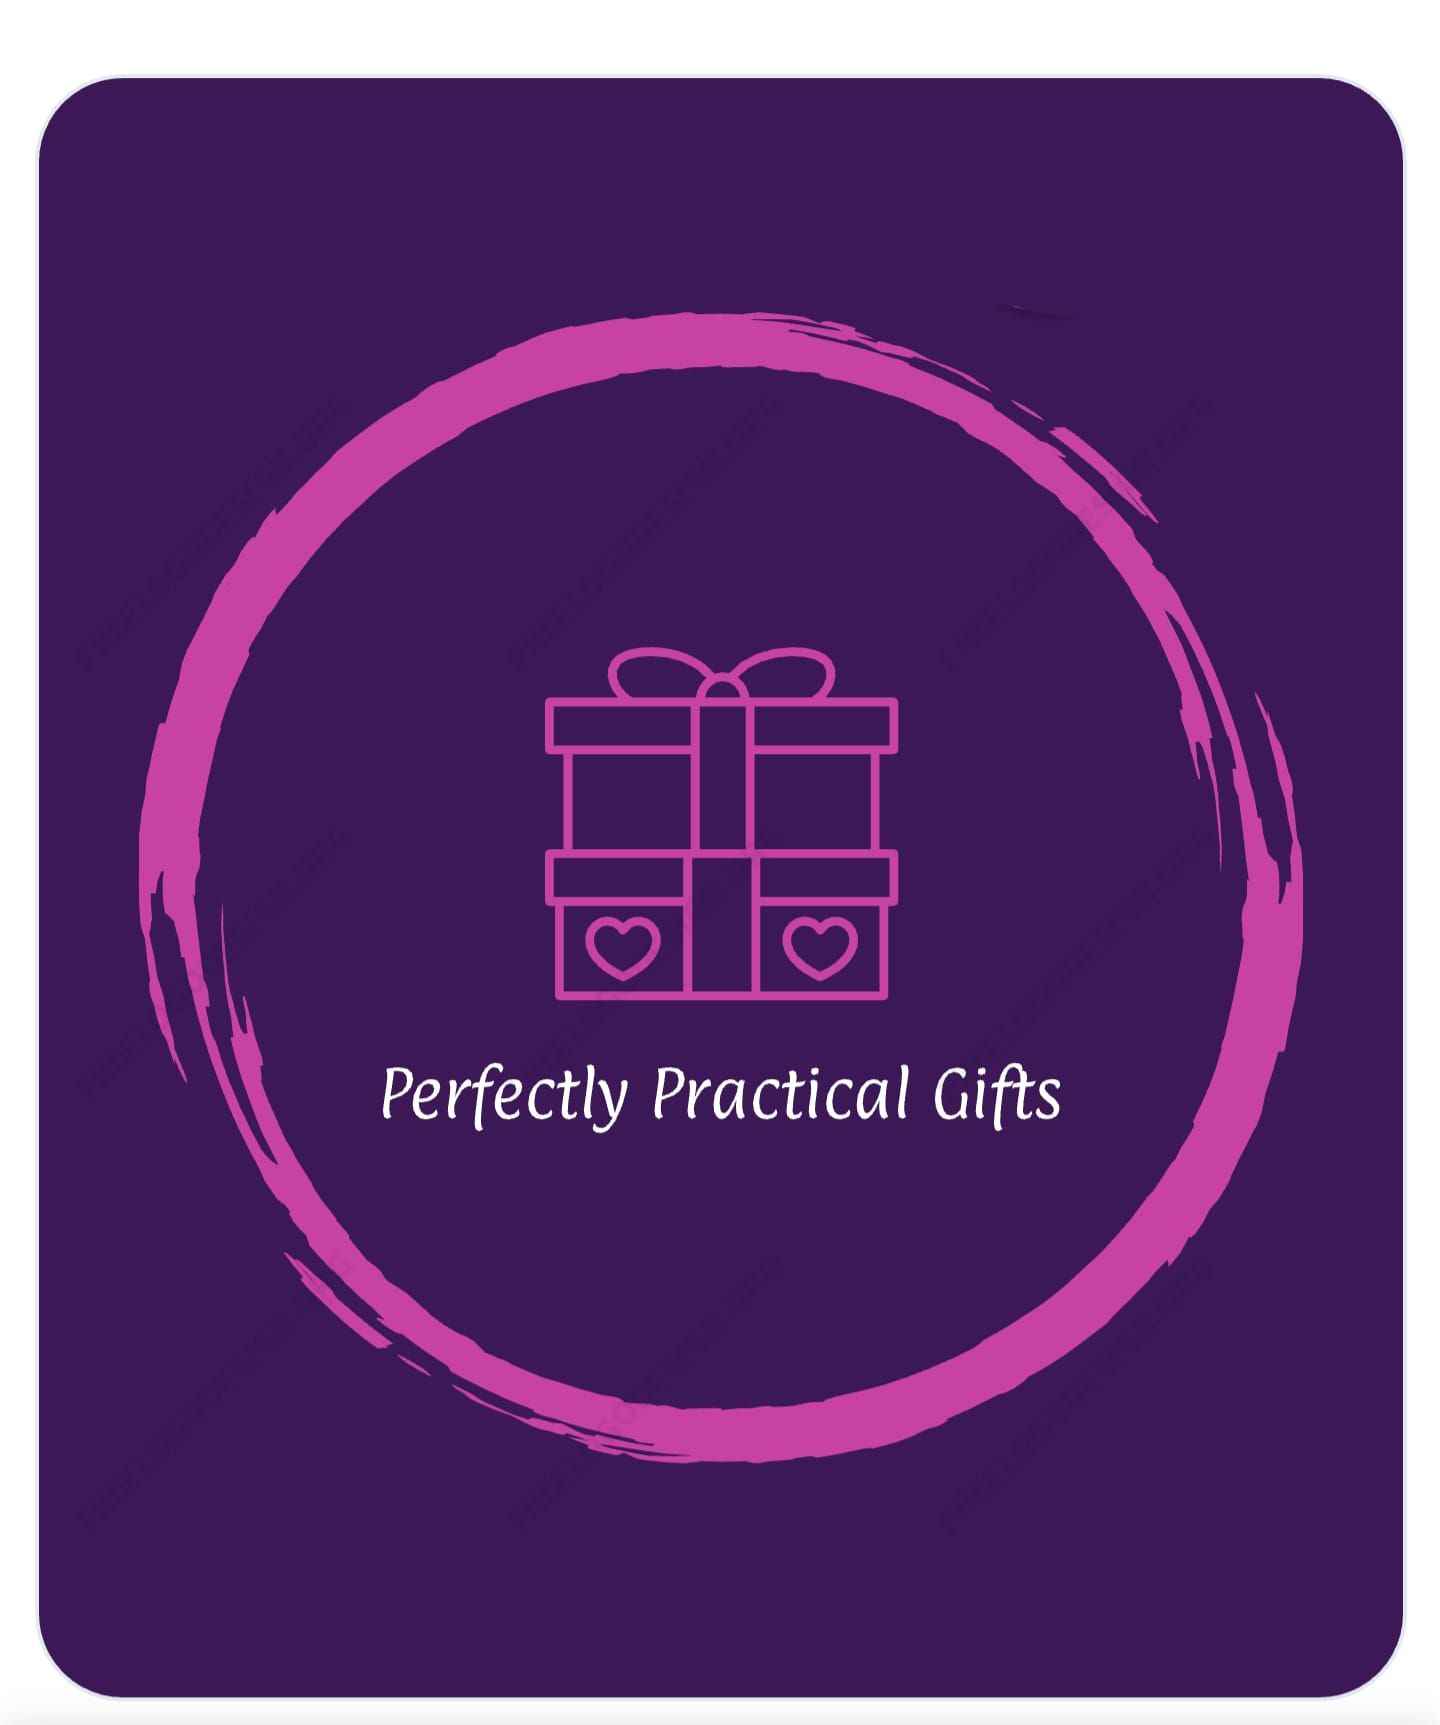 This shop is called PerfectlyPracticalGifts 